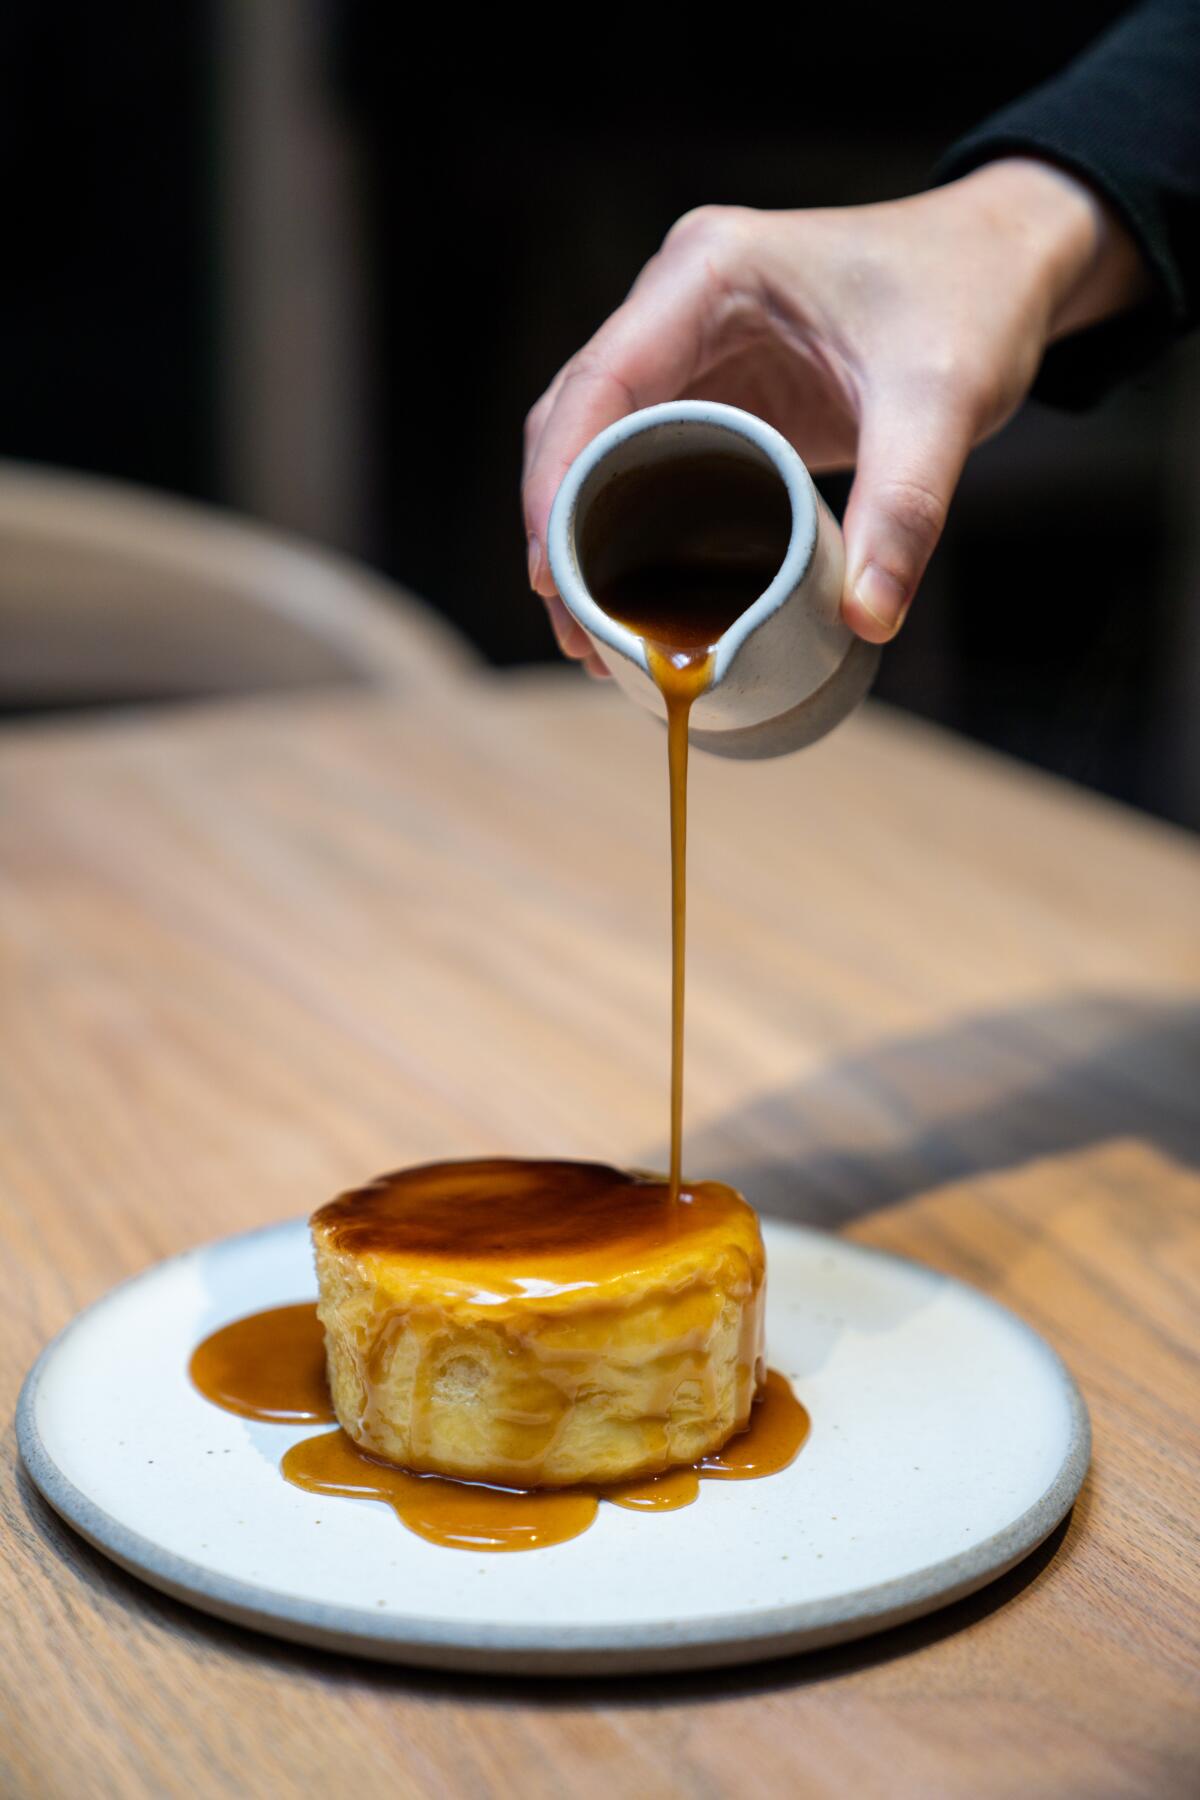 LOS ANGELES, CA - MARCH 14: Pastry Chef Dyan Ng pours the honey butter over the brioche as she makes a pan roasted honey butter Brioche in the kitchen at Auburn on Saturday, March 14, 2020 in Los Angeles, CA. (Kent Nishimura / Los Angeles Times)